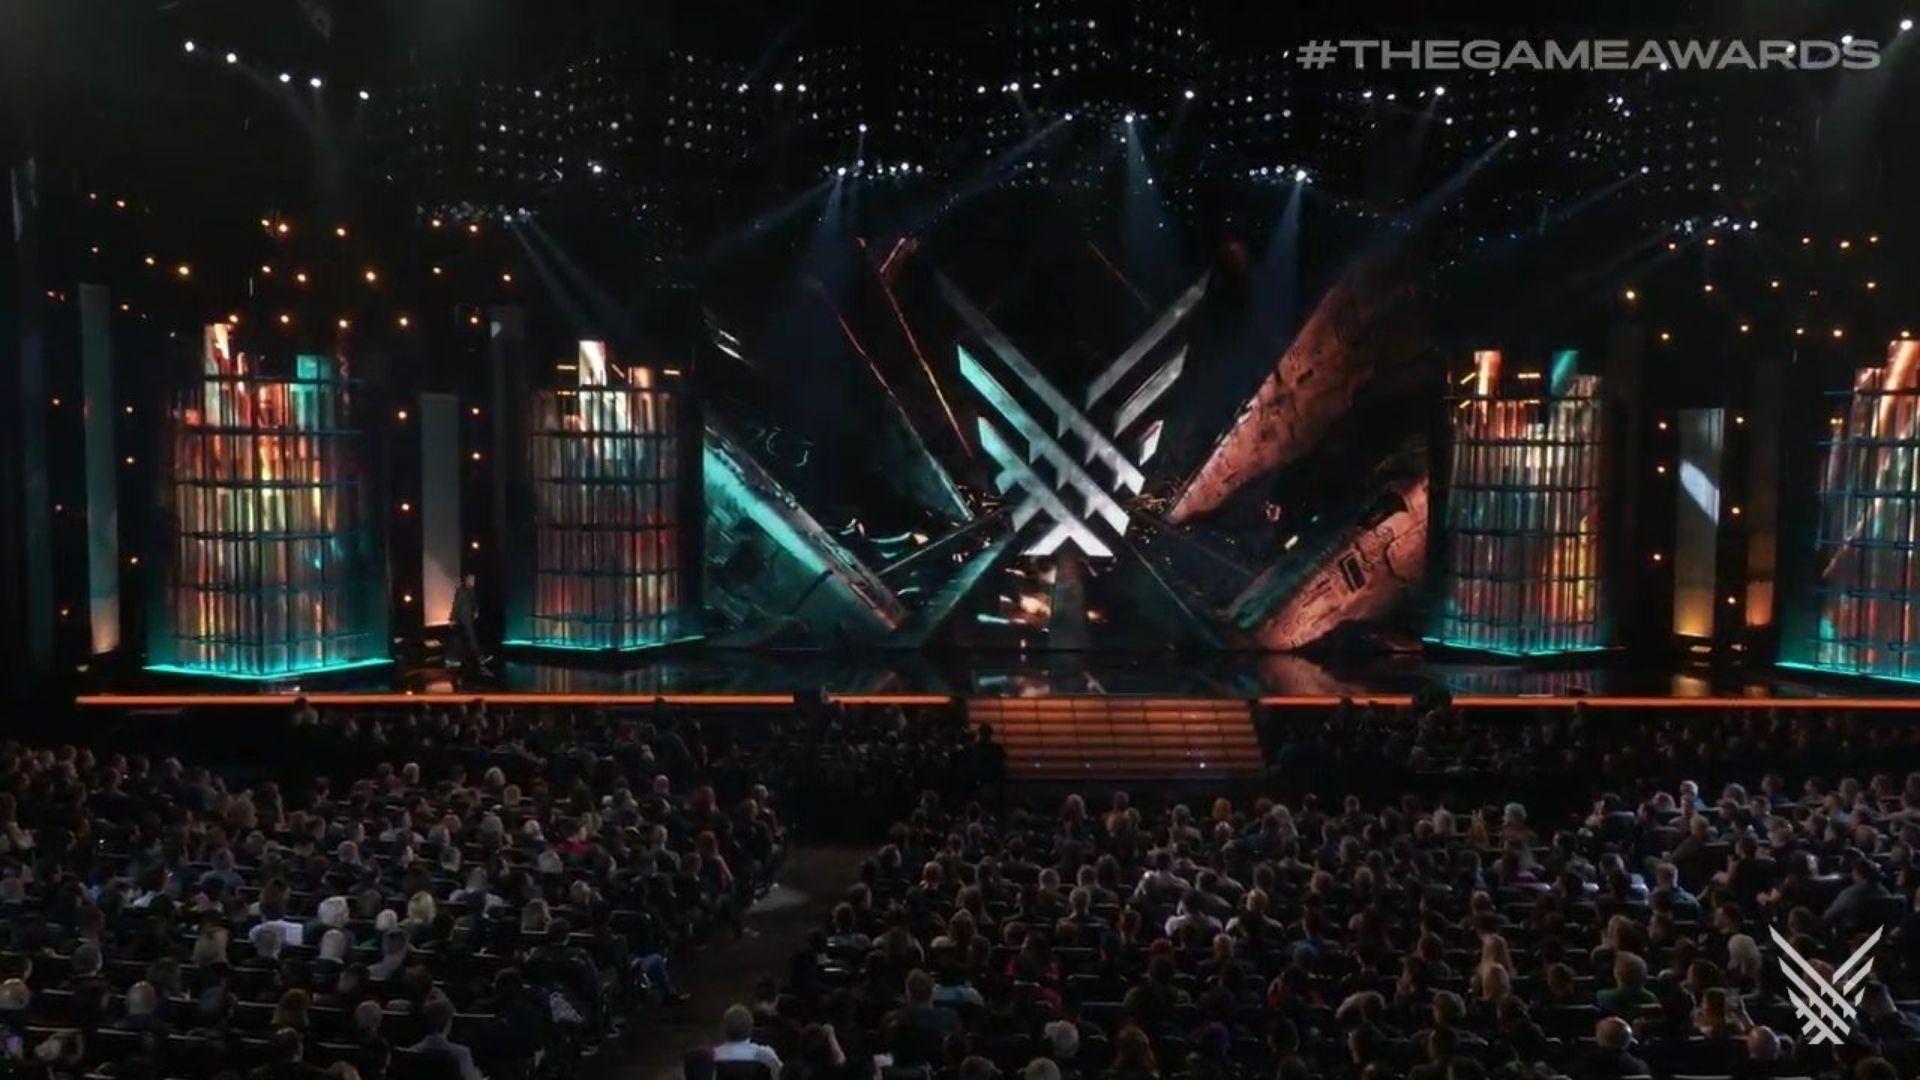 Nominations for The Game Awards 2020 Have Been Announced - KeenGamer